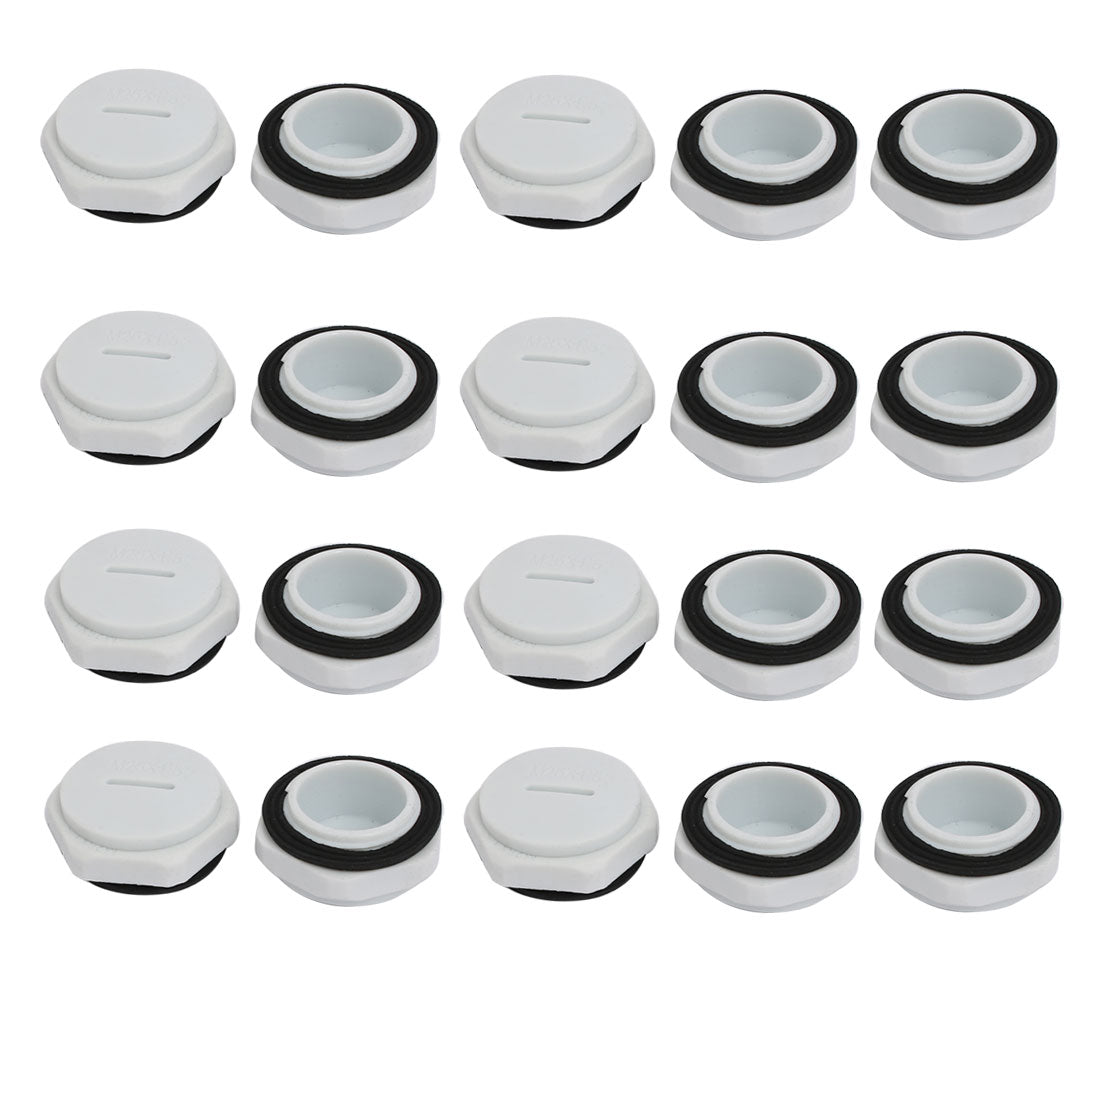 uxcell Uxcell M25 Nylon Male Threaded Cable Gland Screw End Cap Cover Gray 20pcs